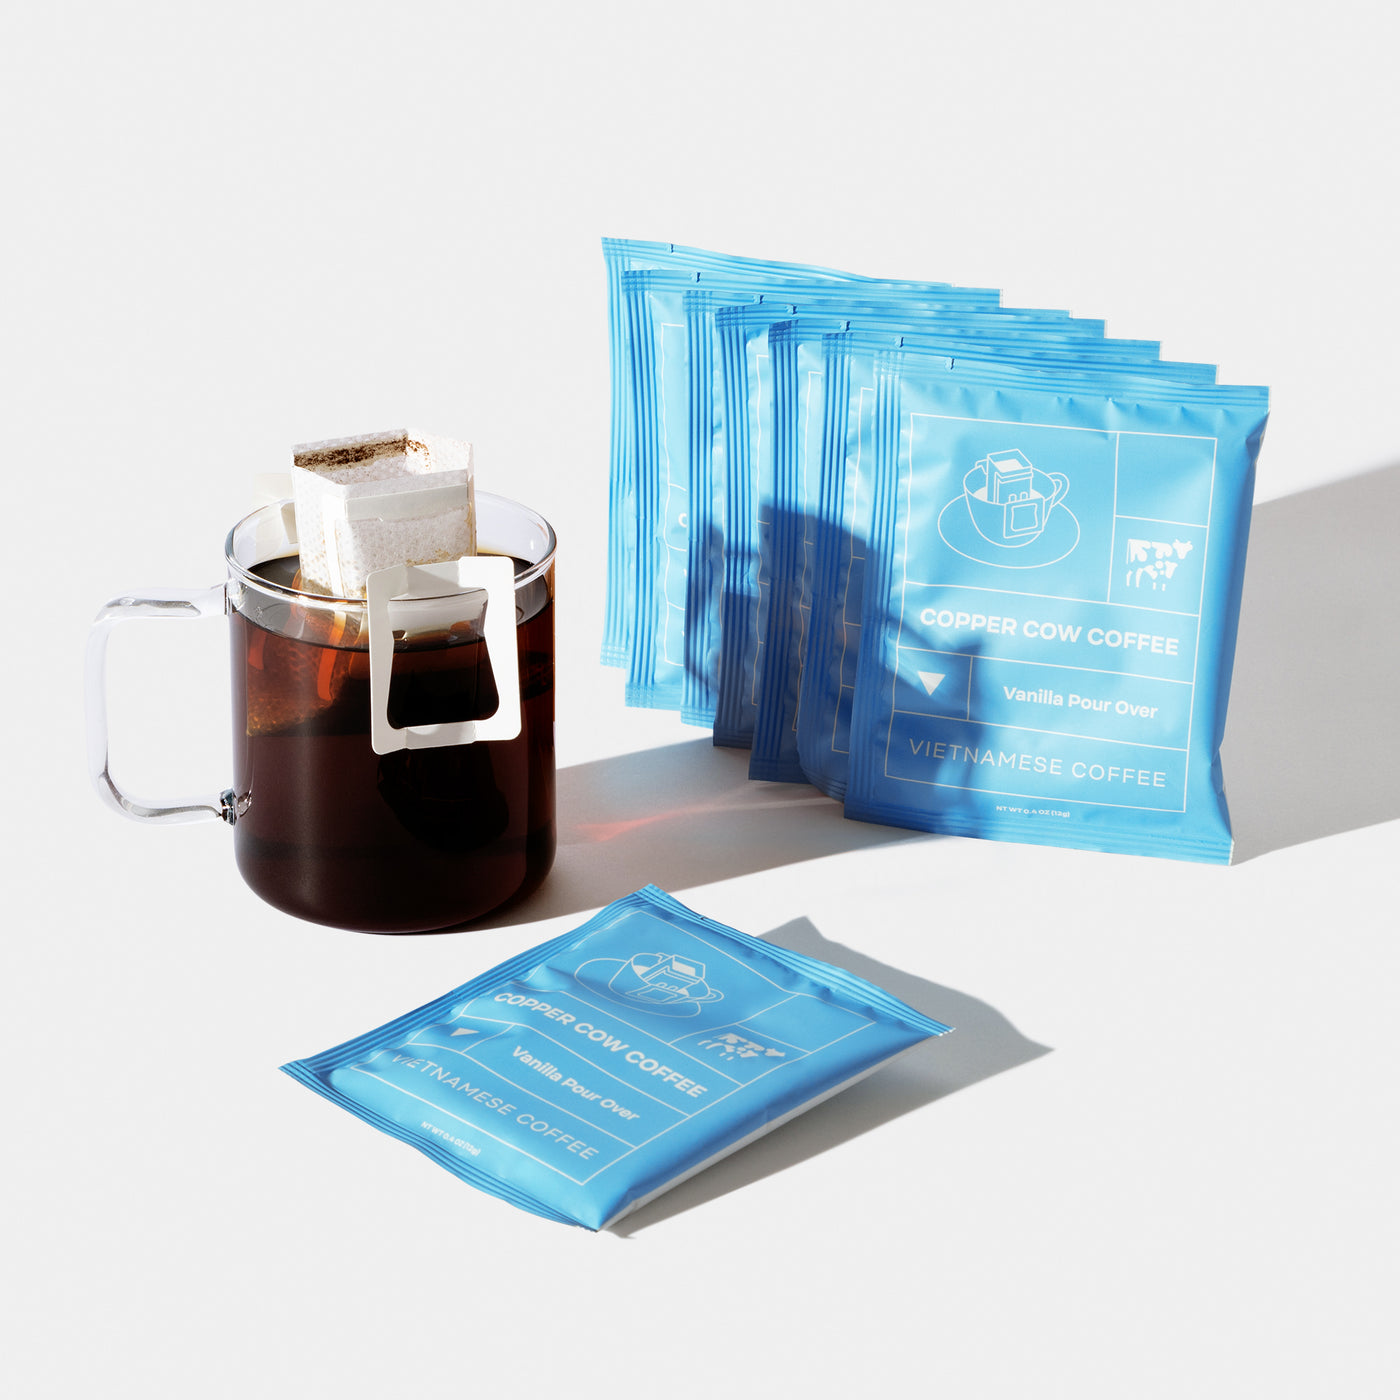 8-Pack of Vanilla Vietnamese Coffee single-serve pour over pouches.